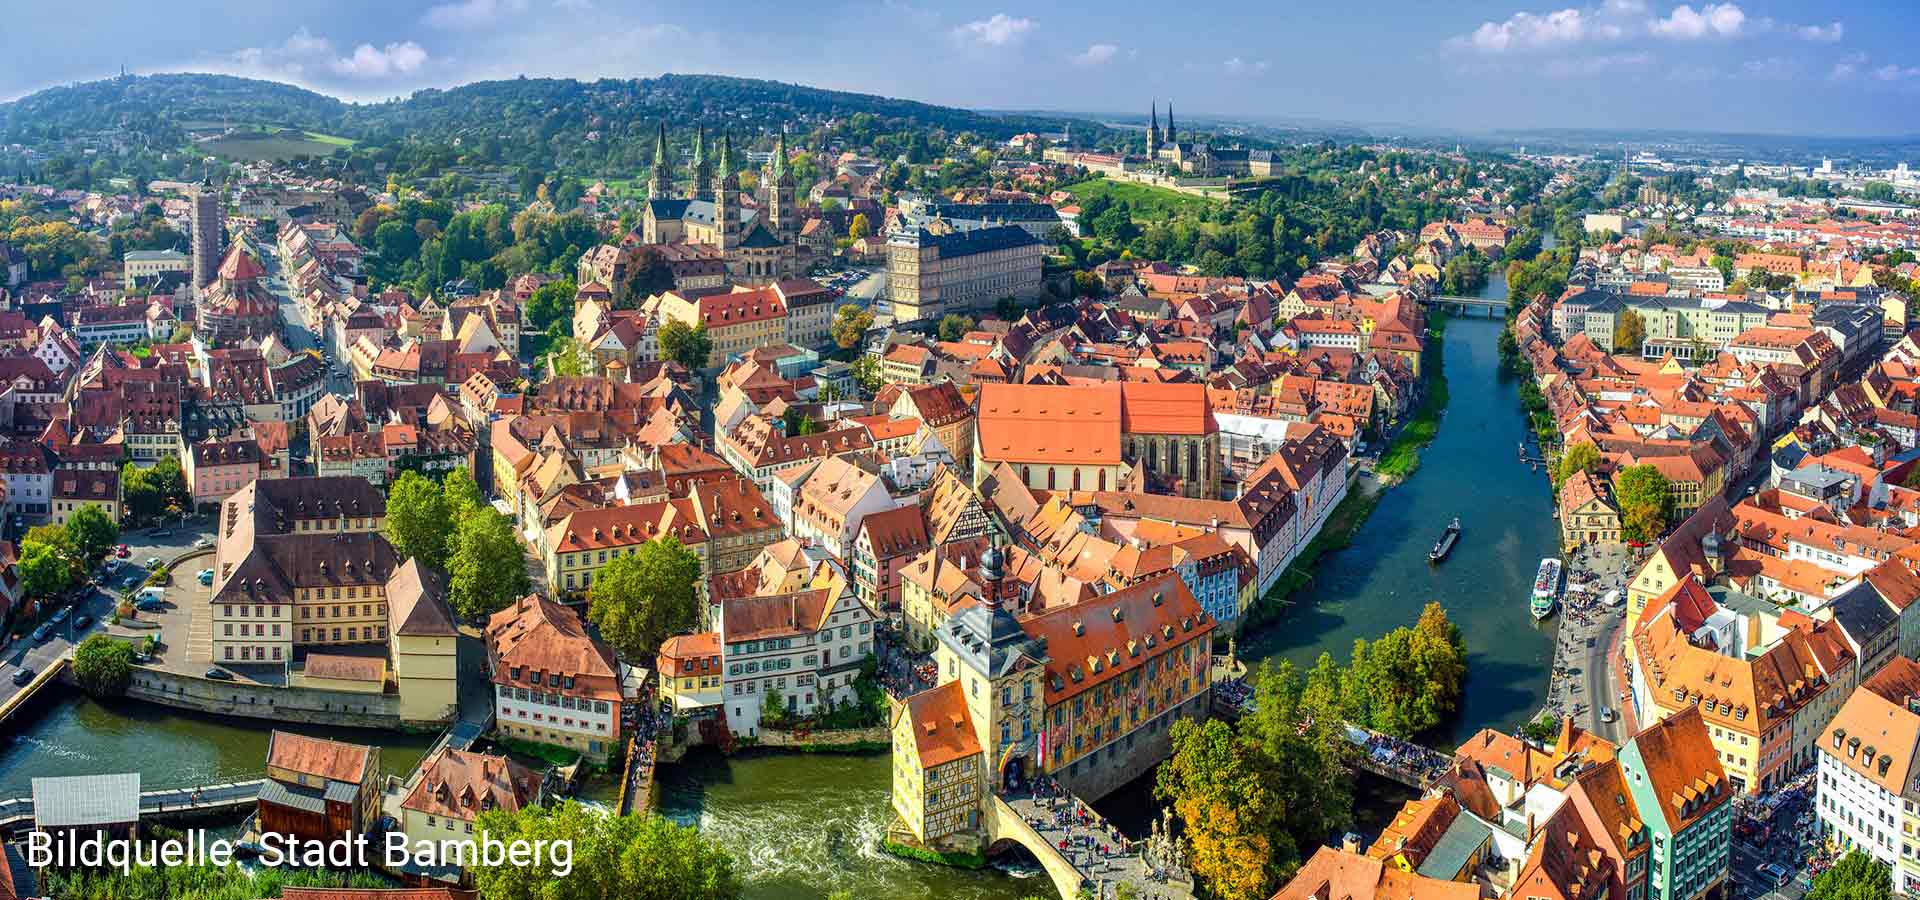 In an aerial view, one looks over the old town of Bamberg with old half-timbered houses built closely together and a river in the foreground that runs under several bridges as well as large churches in the background.